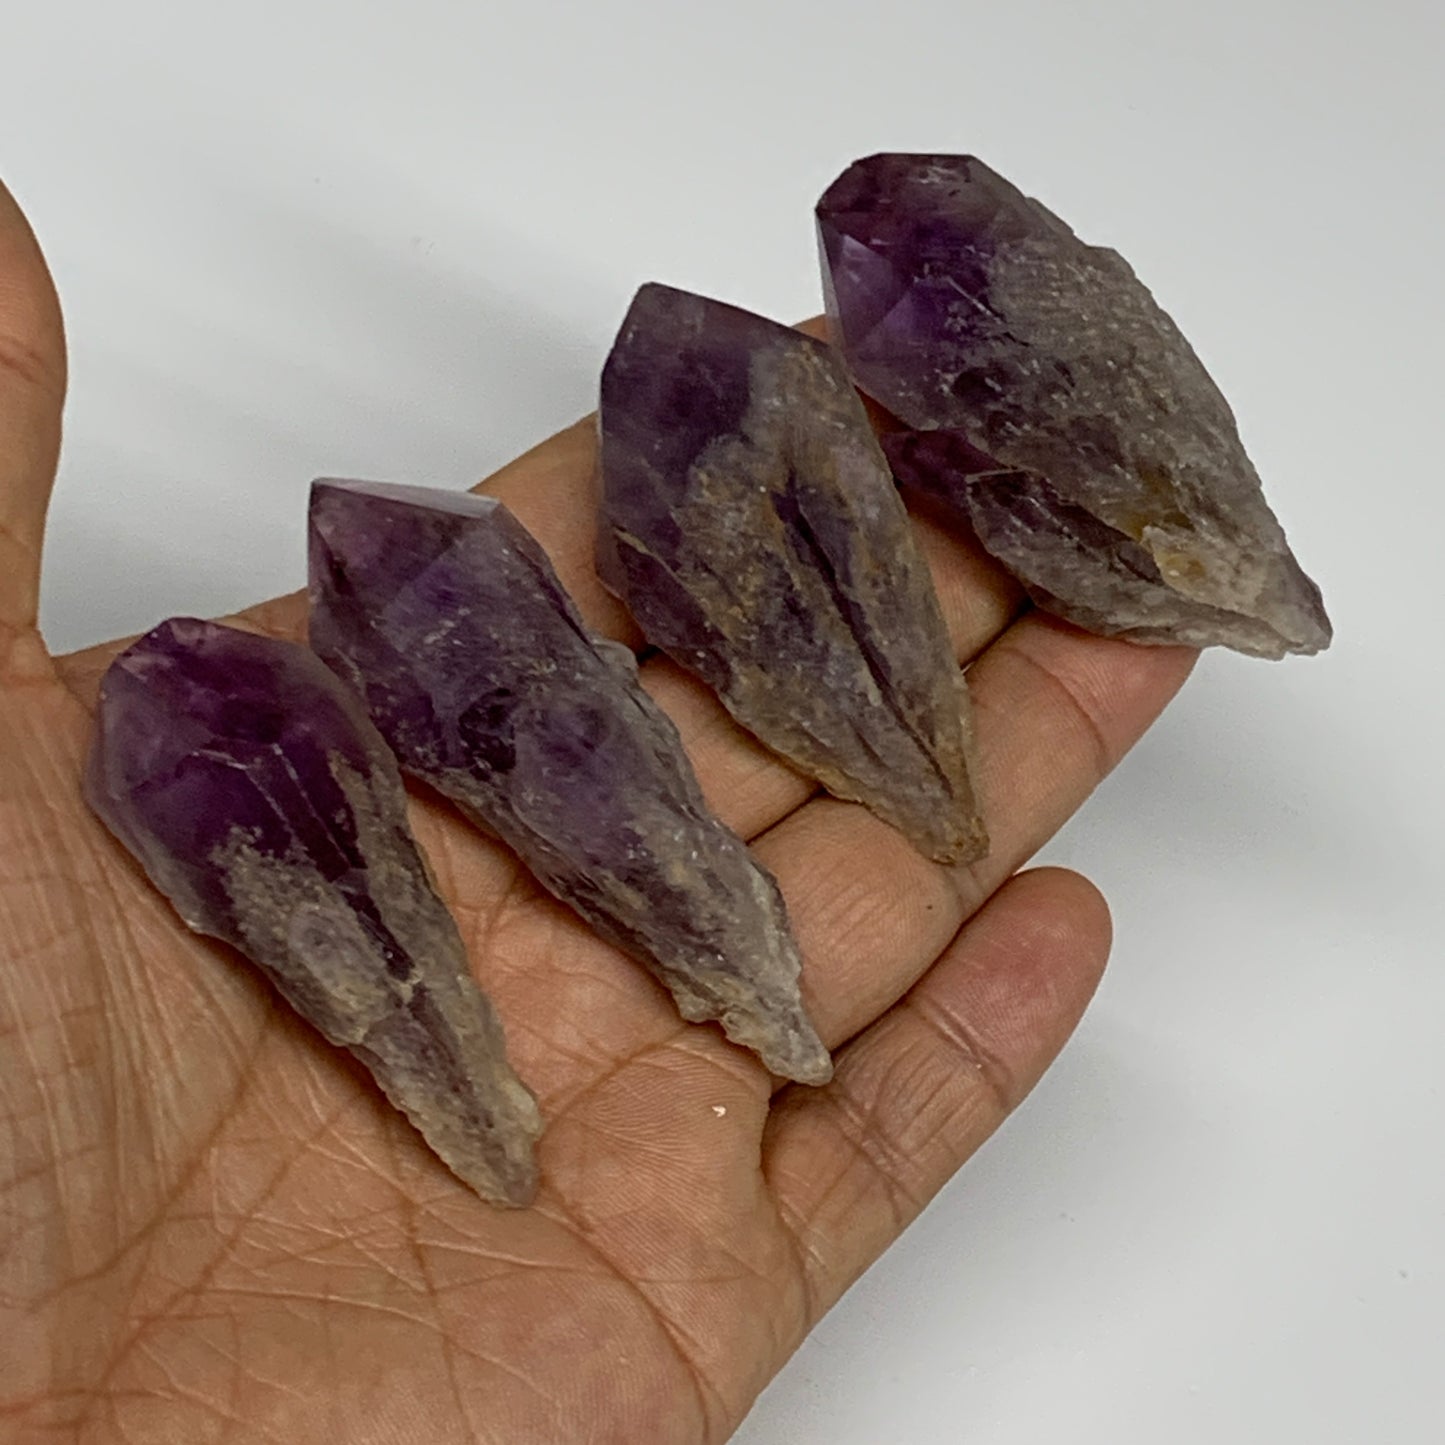 118.3g, 2.2" - 2.5", 4pcs, Amethyst Point Polished Rough lower part, B32394